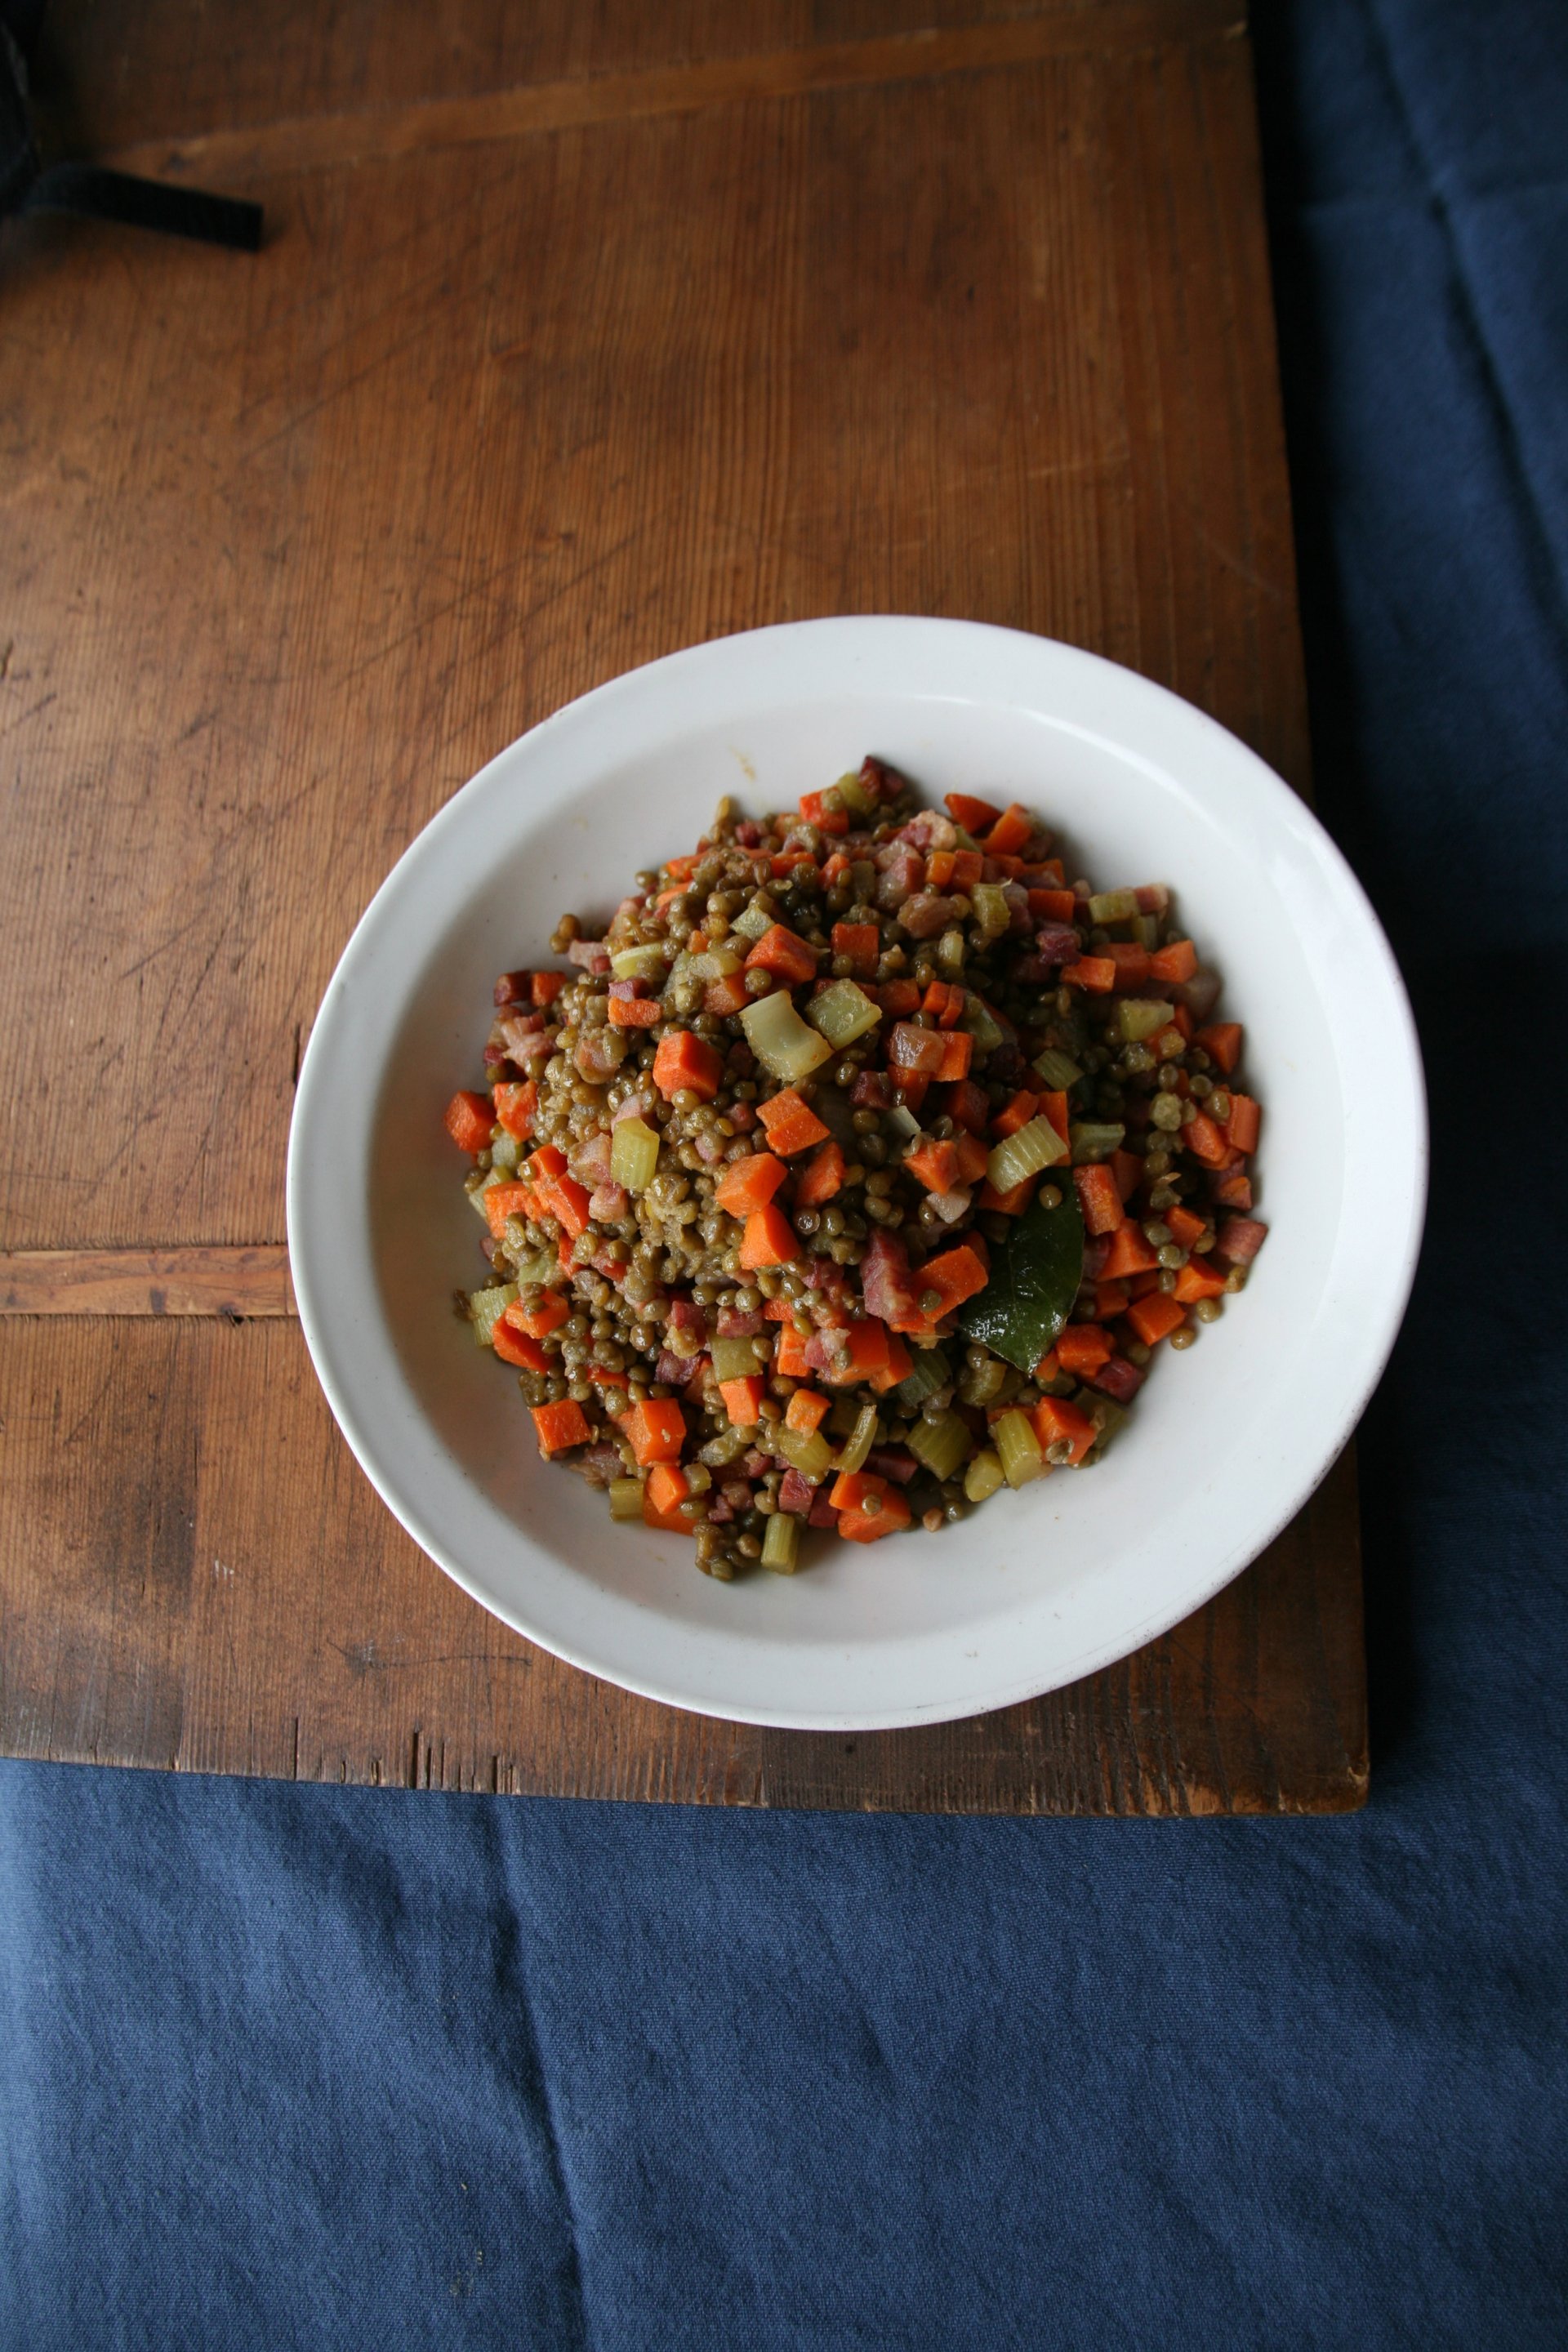 Lentil Country Salad by Lidia Bastianich